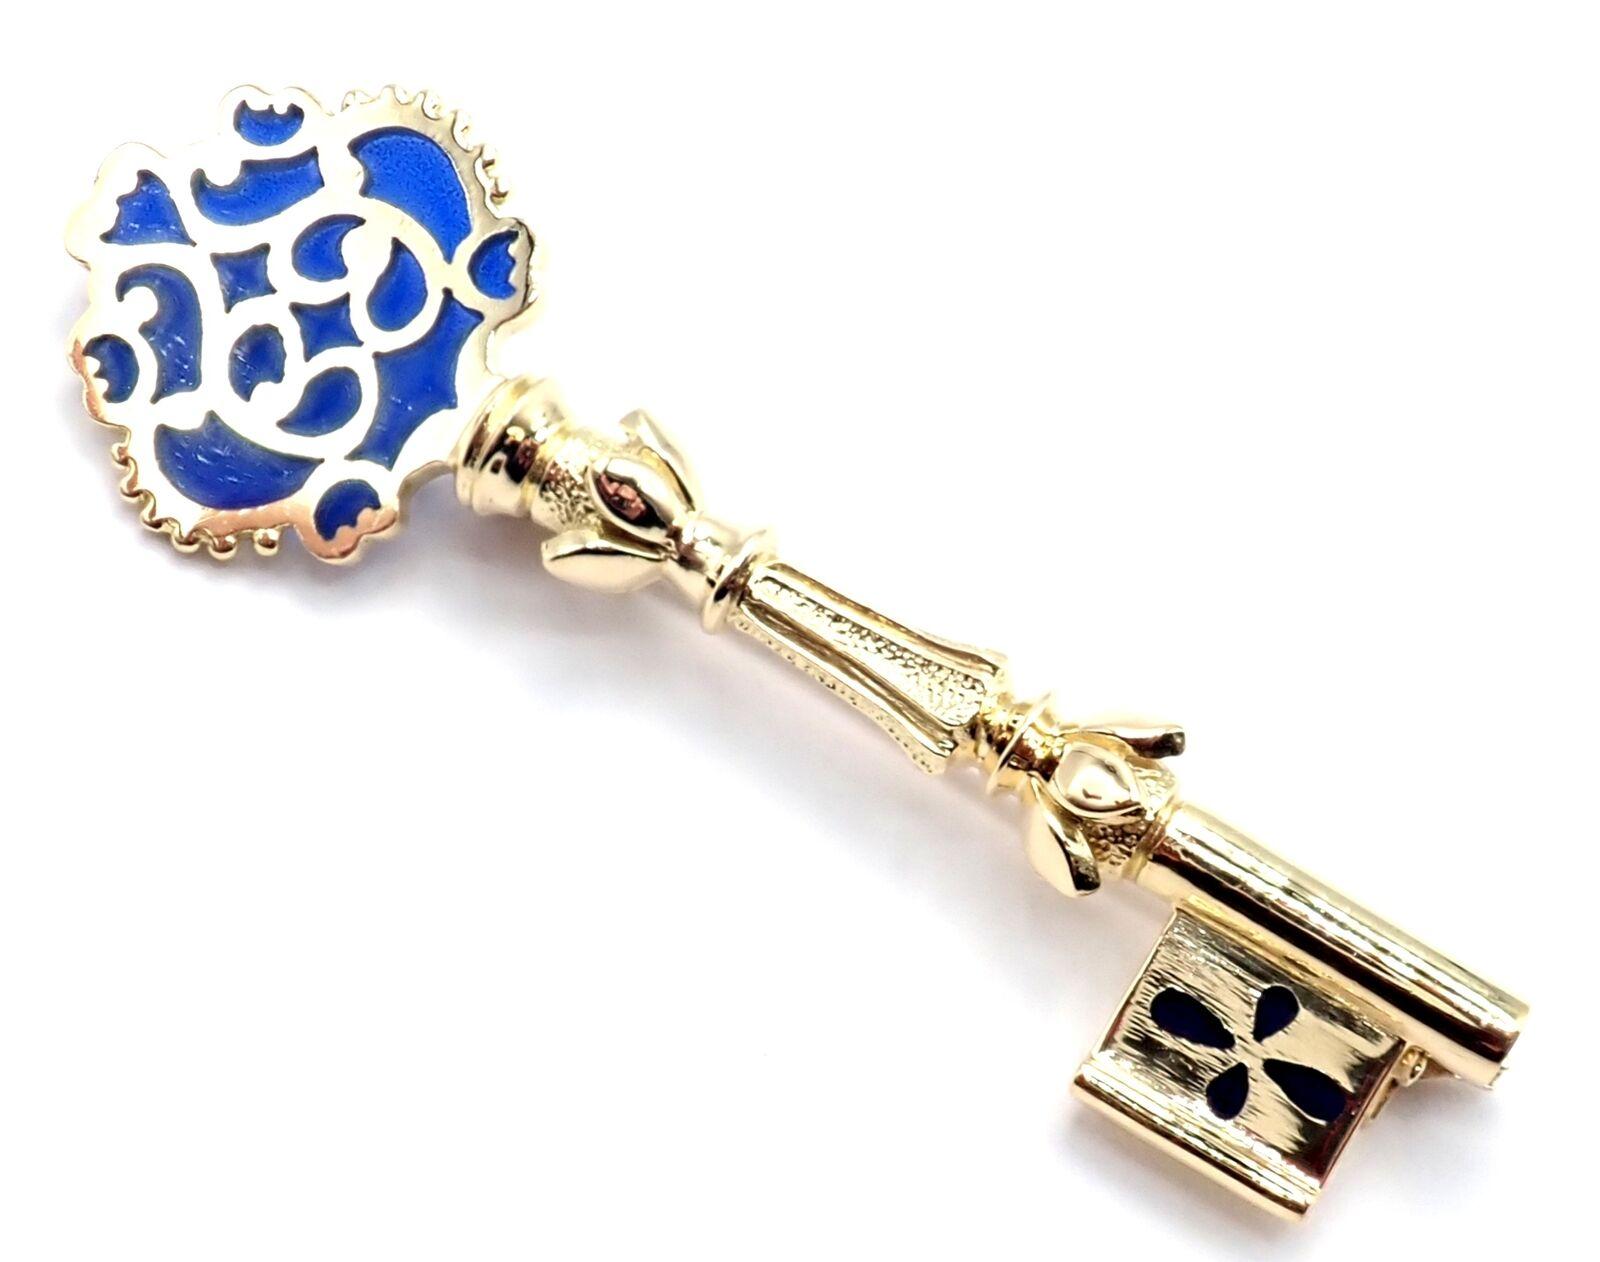 Vintage Mikimoto Blue Enamel Yellow Gold Key Brooch Pin In Excellent Condition For Sale In Holland, PA